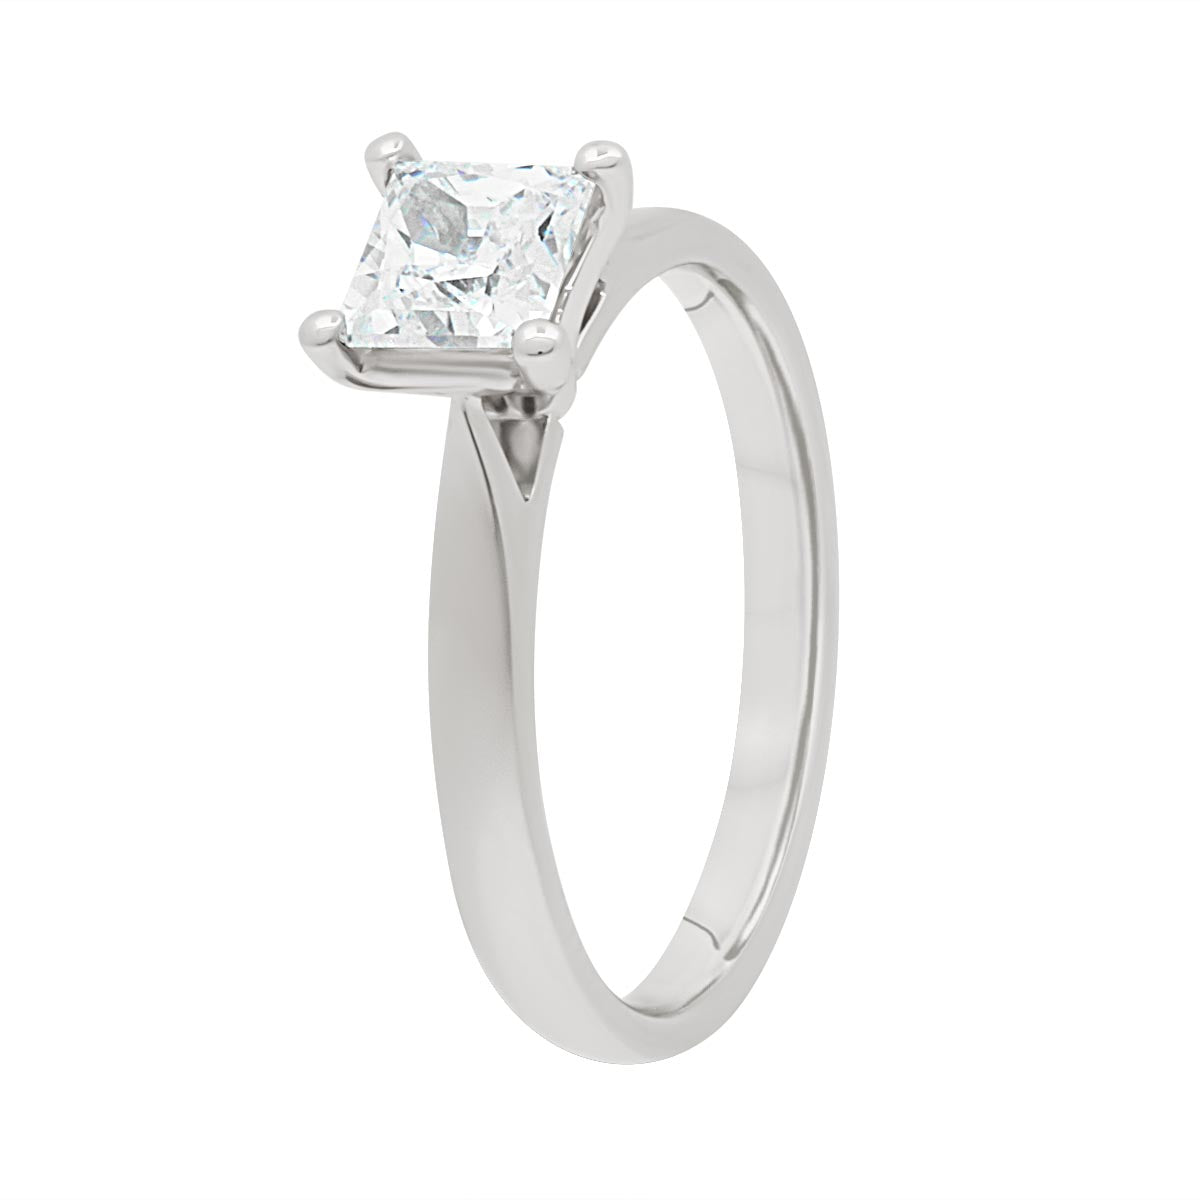 Princess Cut Diamond Ring in white gold at an angled positiion